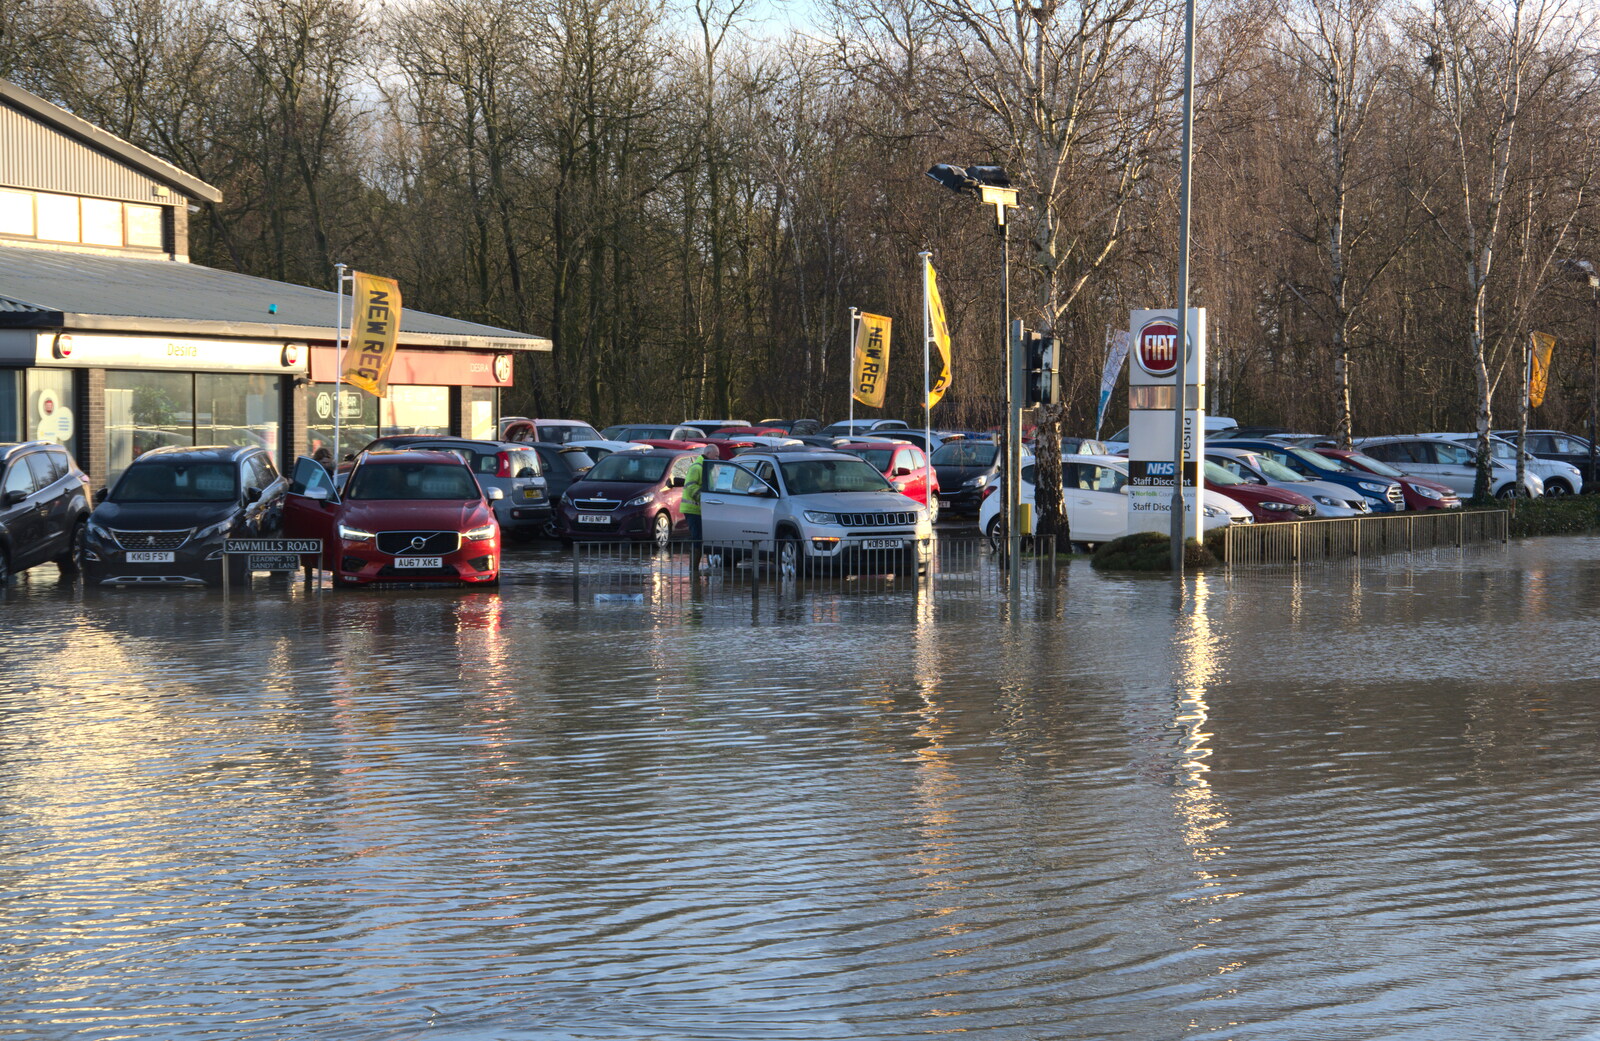 The garage staff rescue some cars from The Christmas Eve Floods, Diss, Norfolk - 24th December 2020